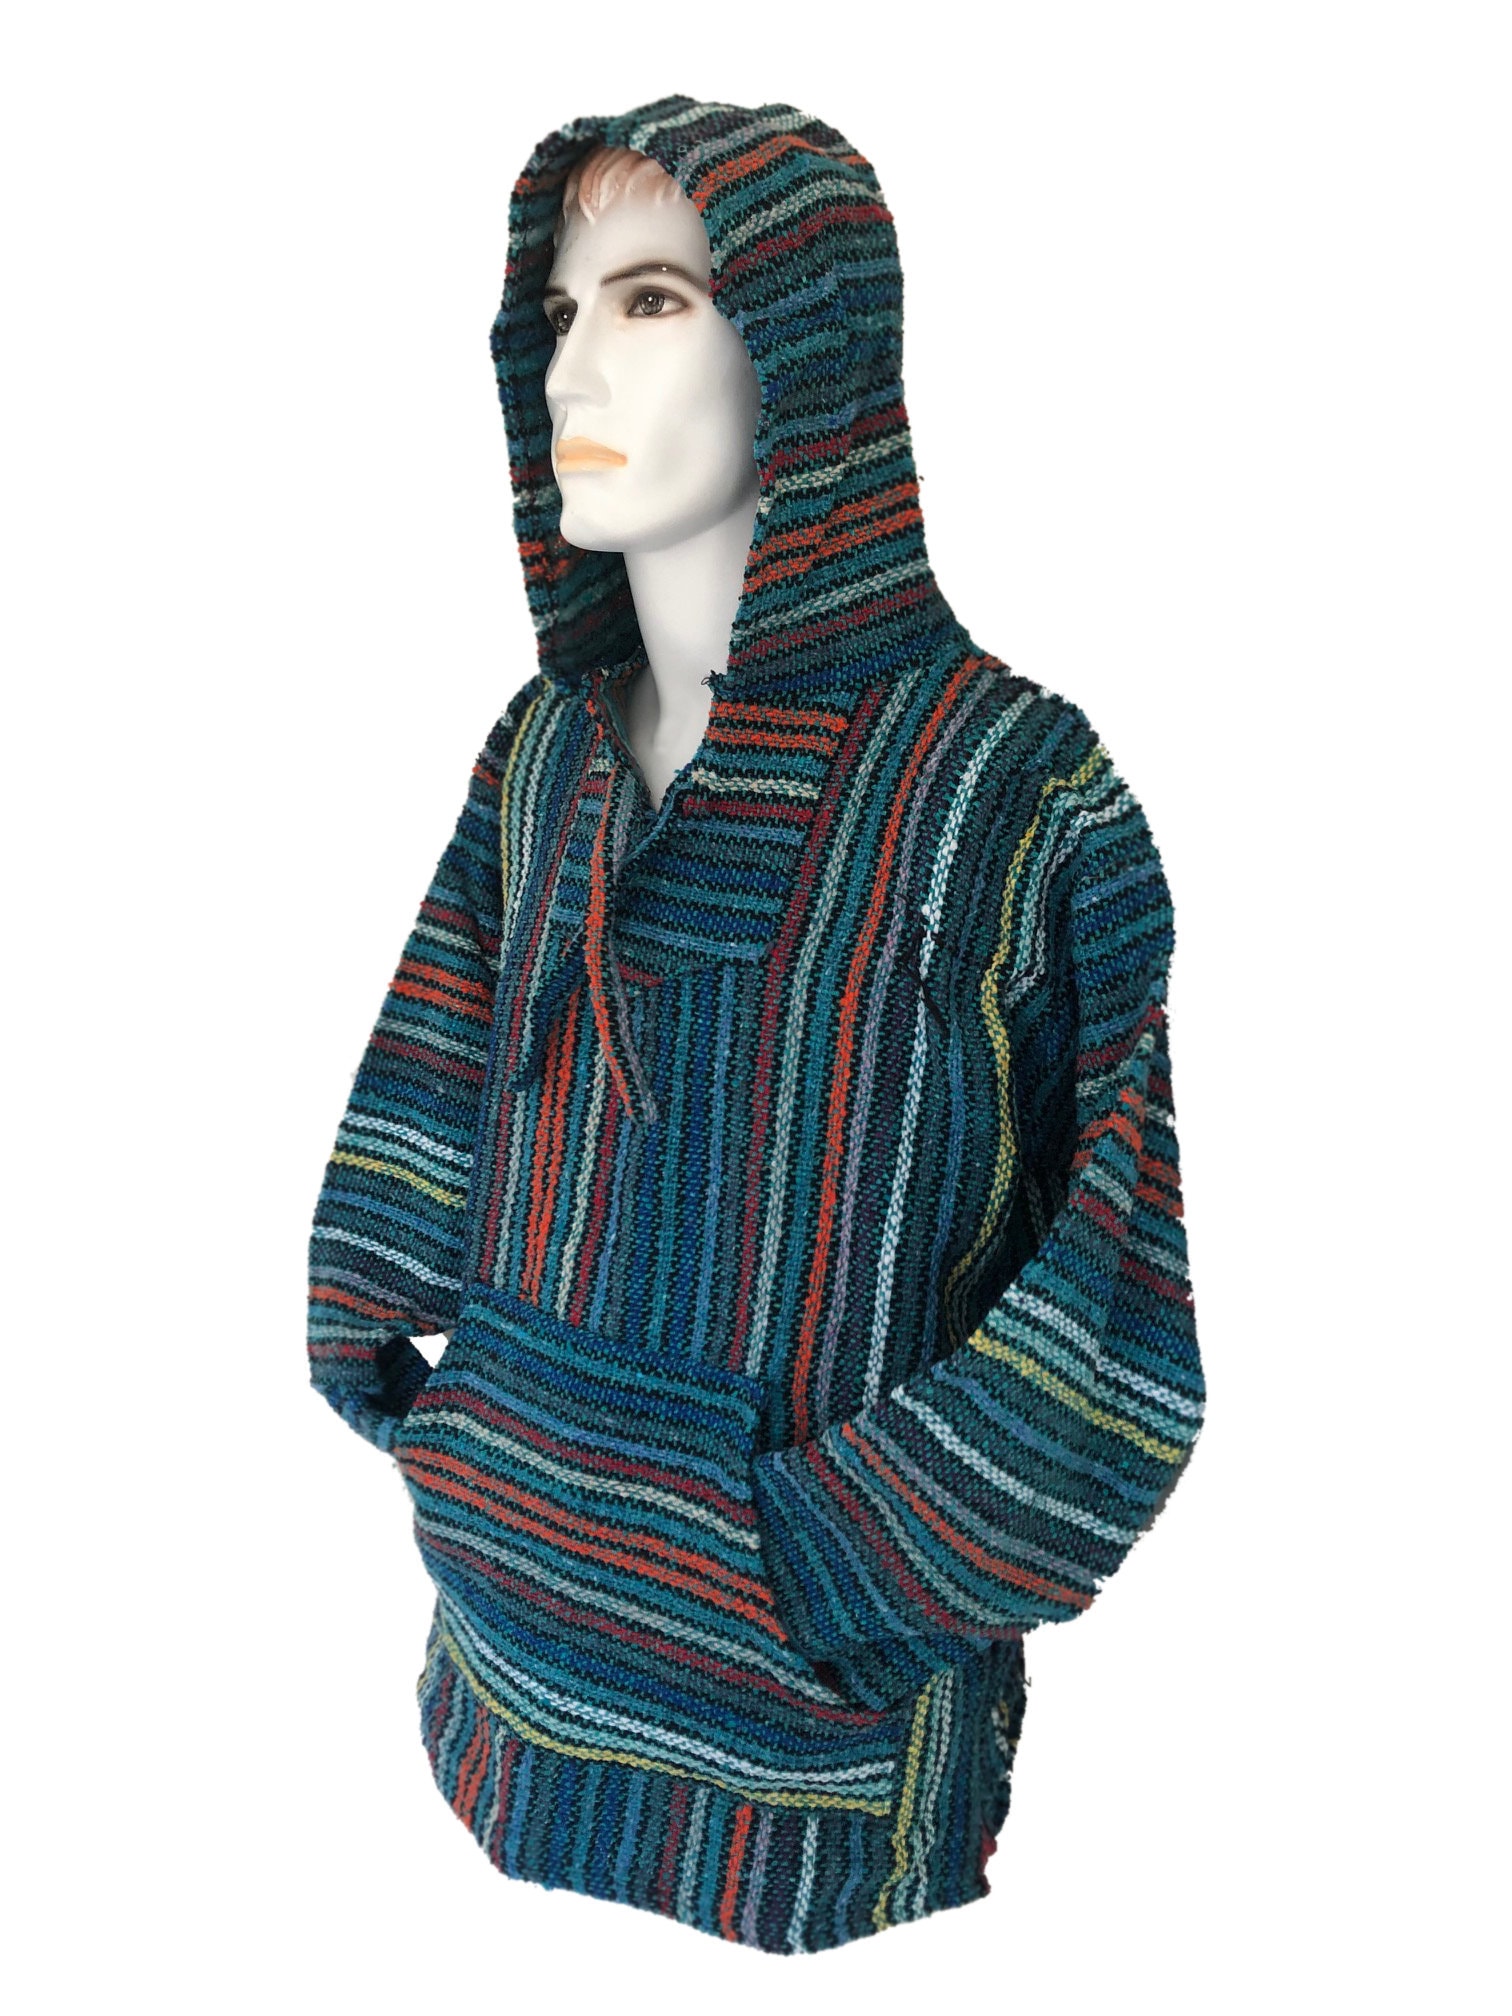 XL Baja Hoodie Hippie Surfer Mexican Poncho Sweater Drug Rug Assorted Colors 